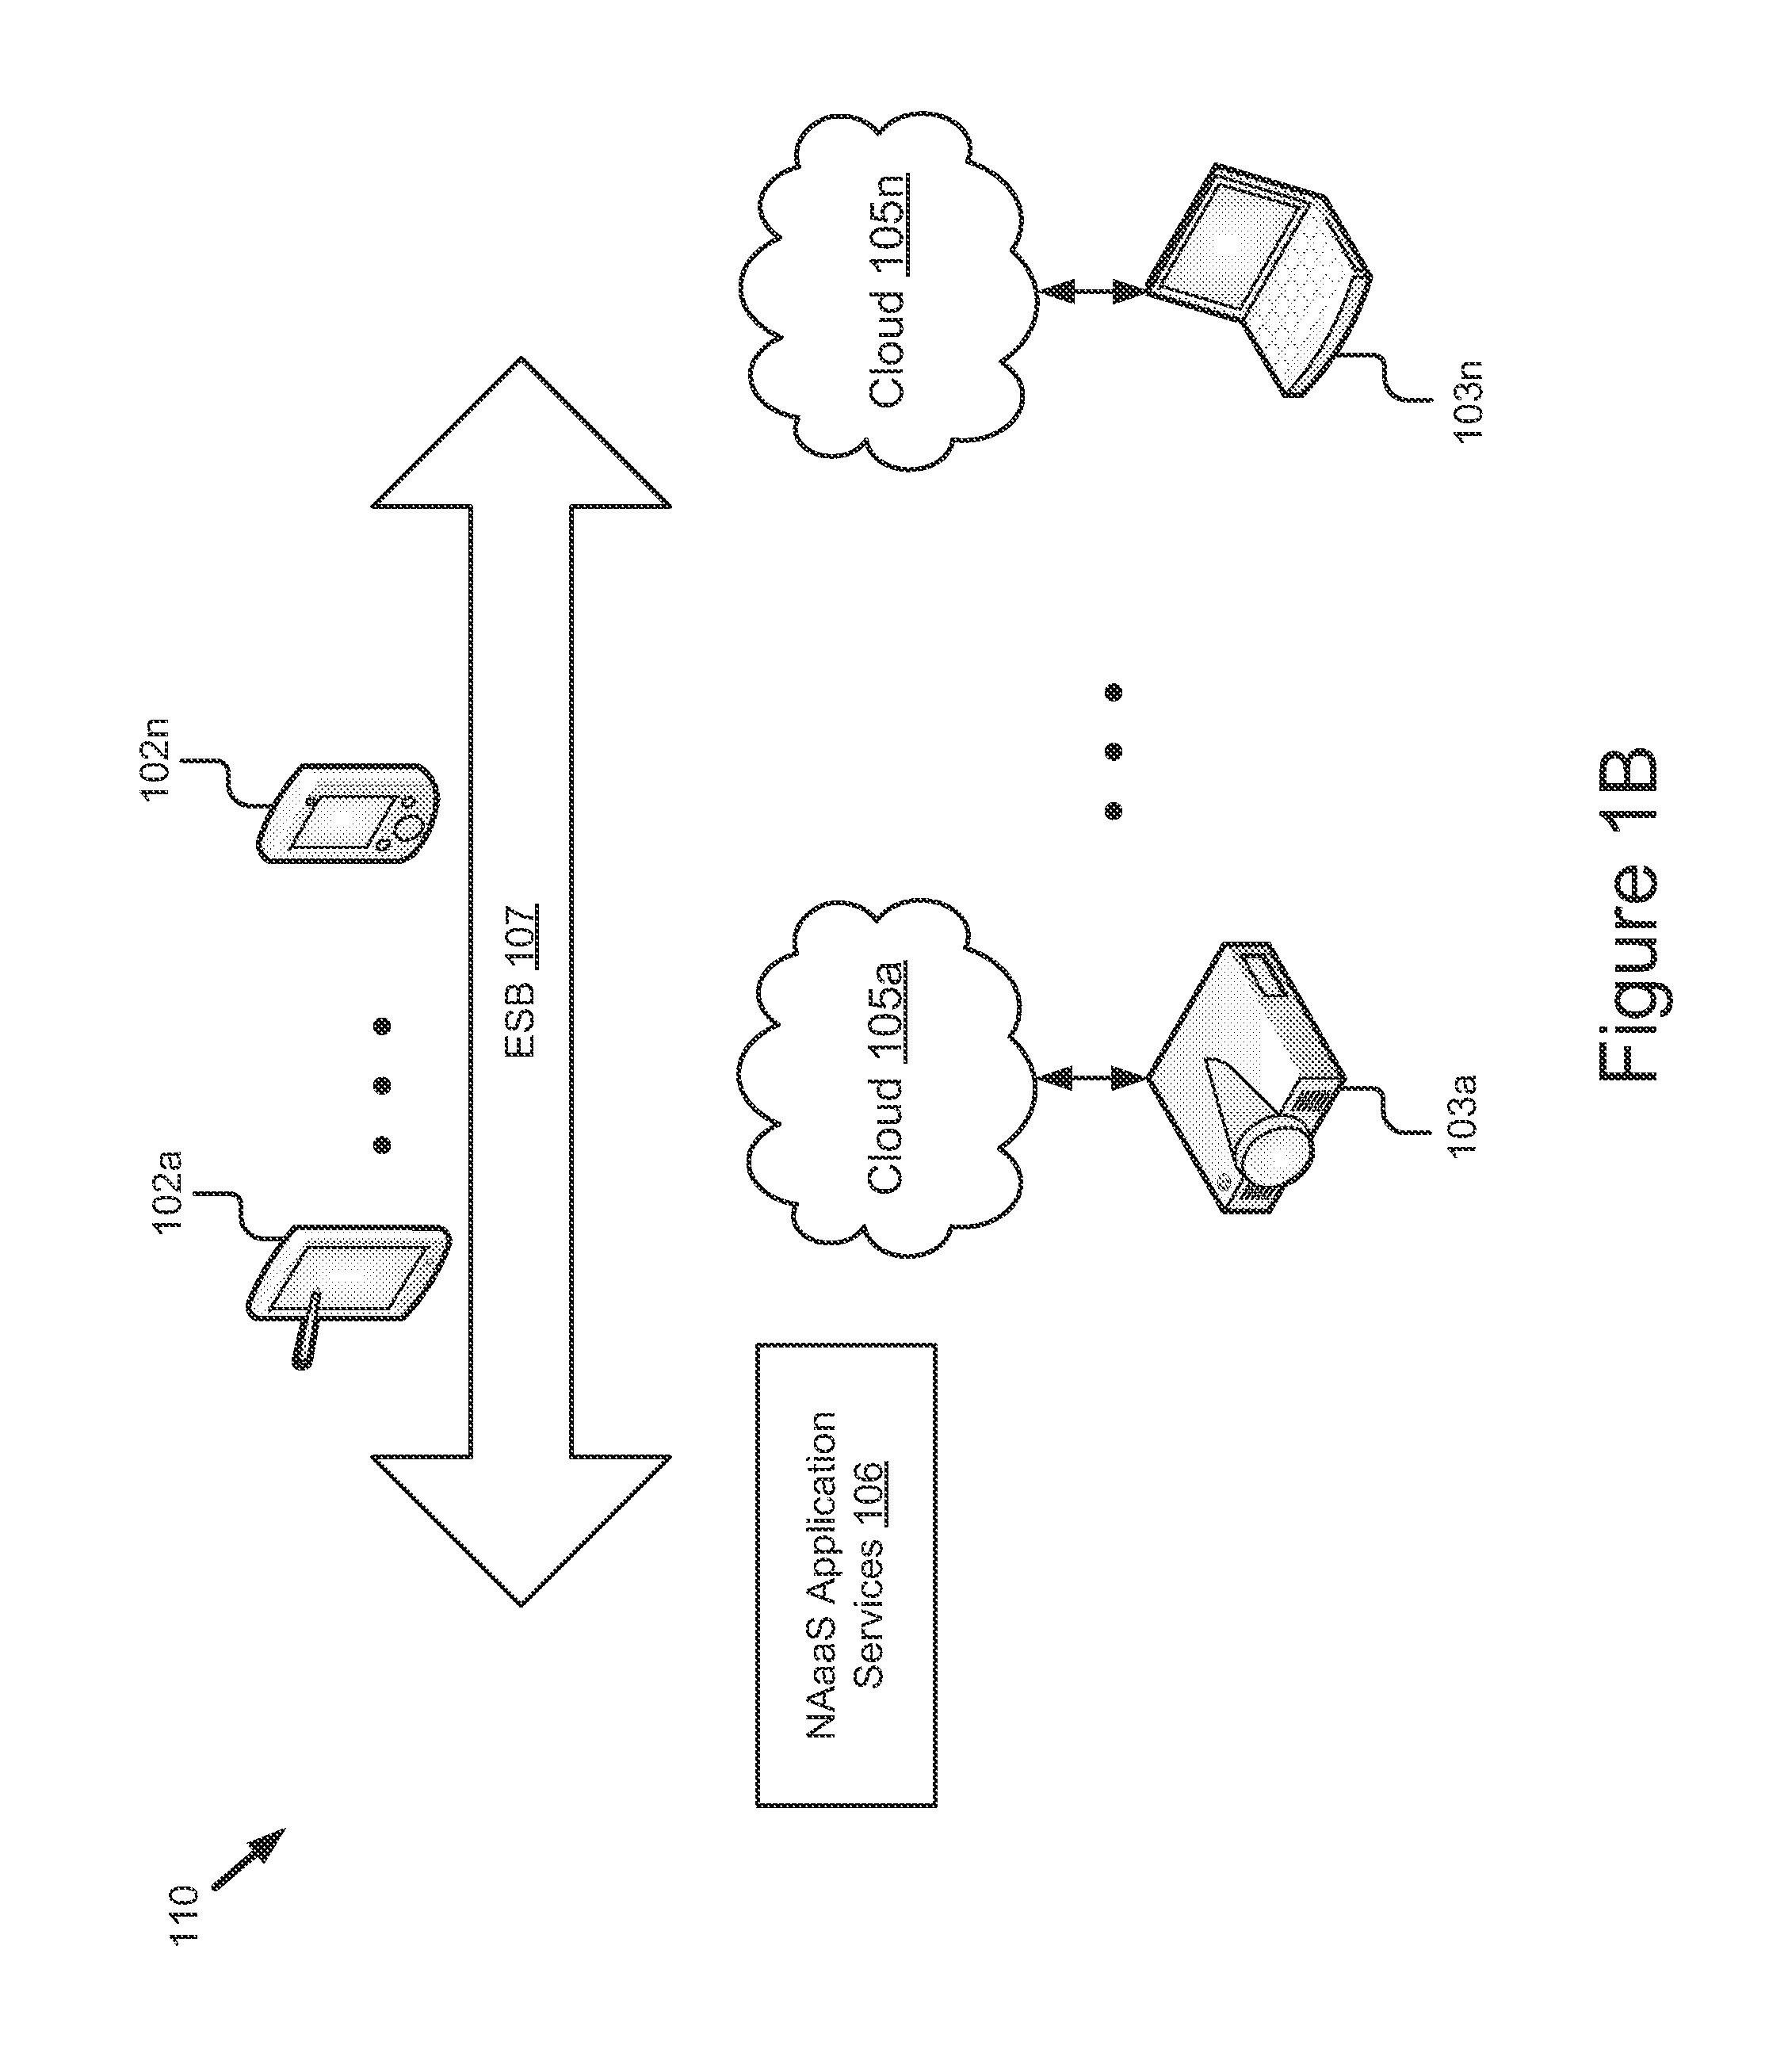 Unified Application Programming Interface for Communicating with Devices and Their Clouds